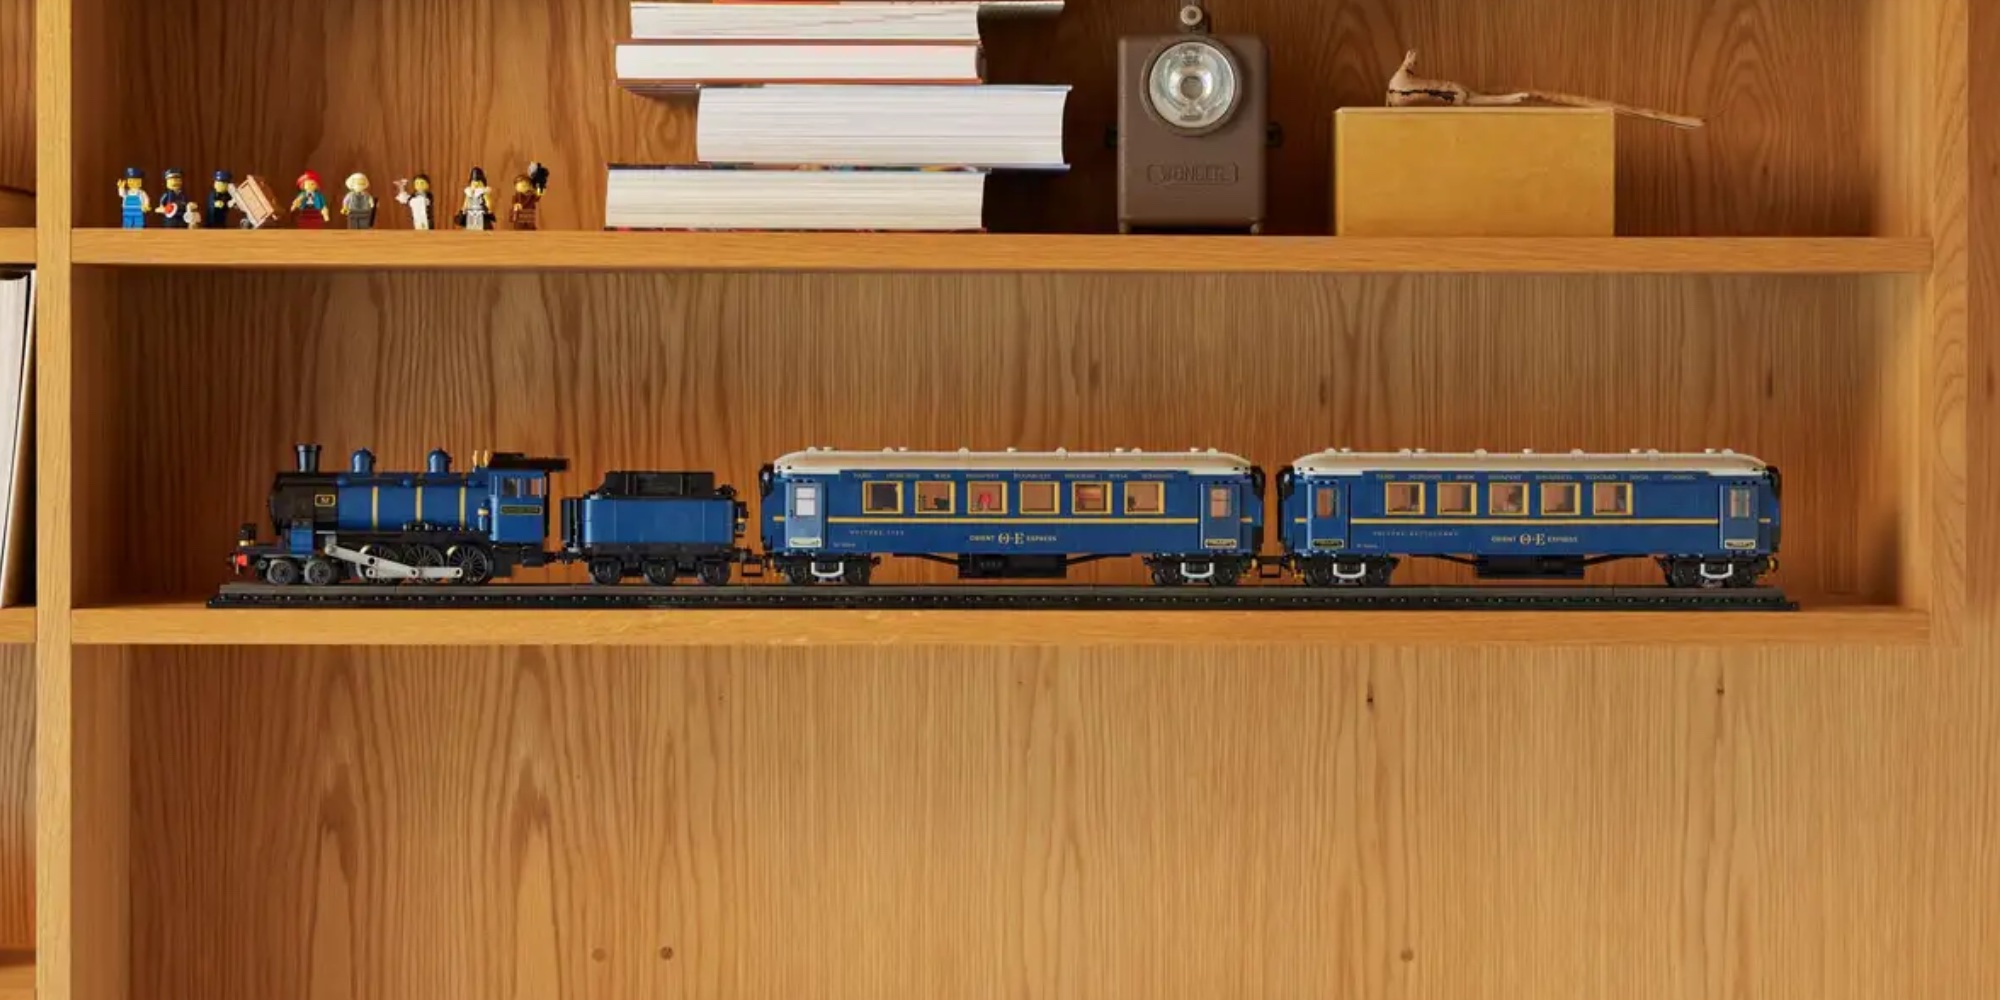 Lego Rolls Out Kit That Recreates the Orient Express - The Messenger